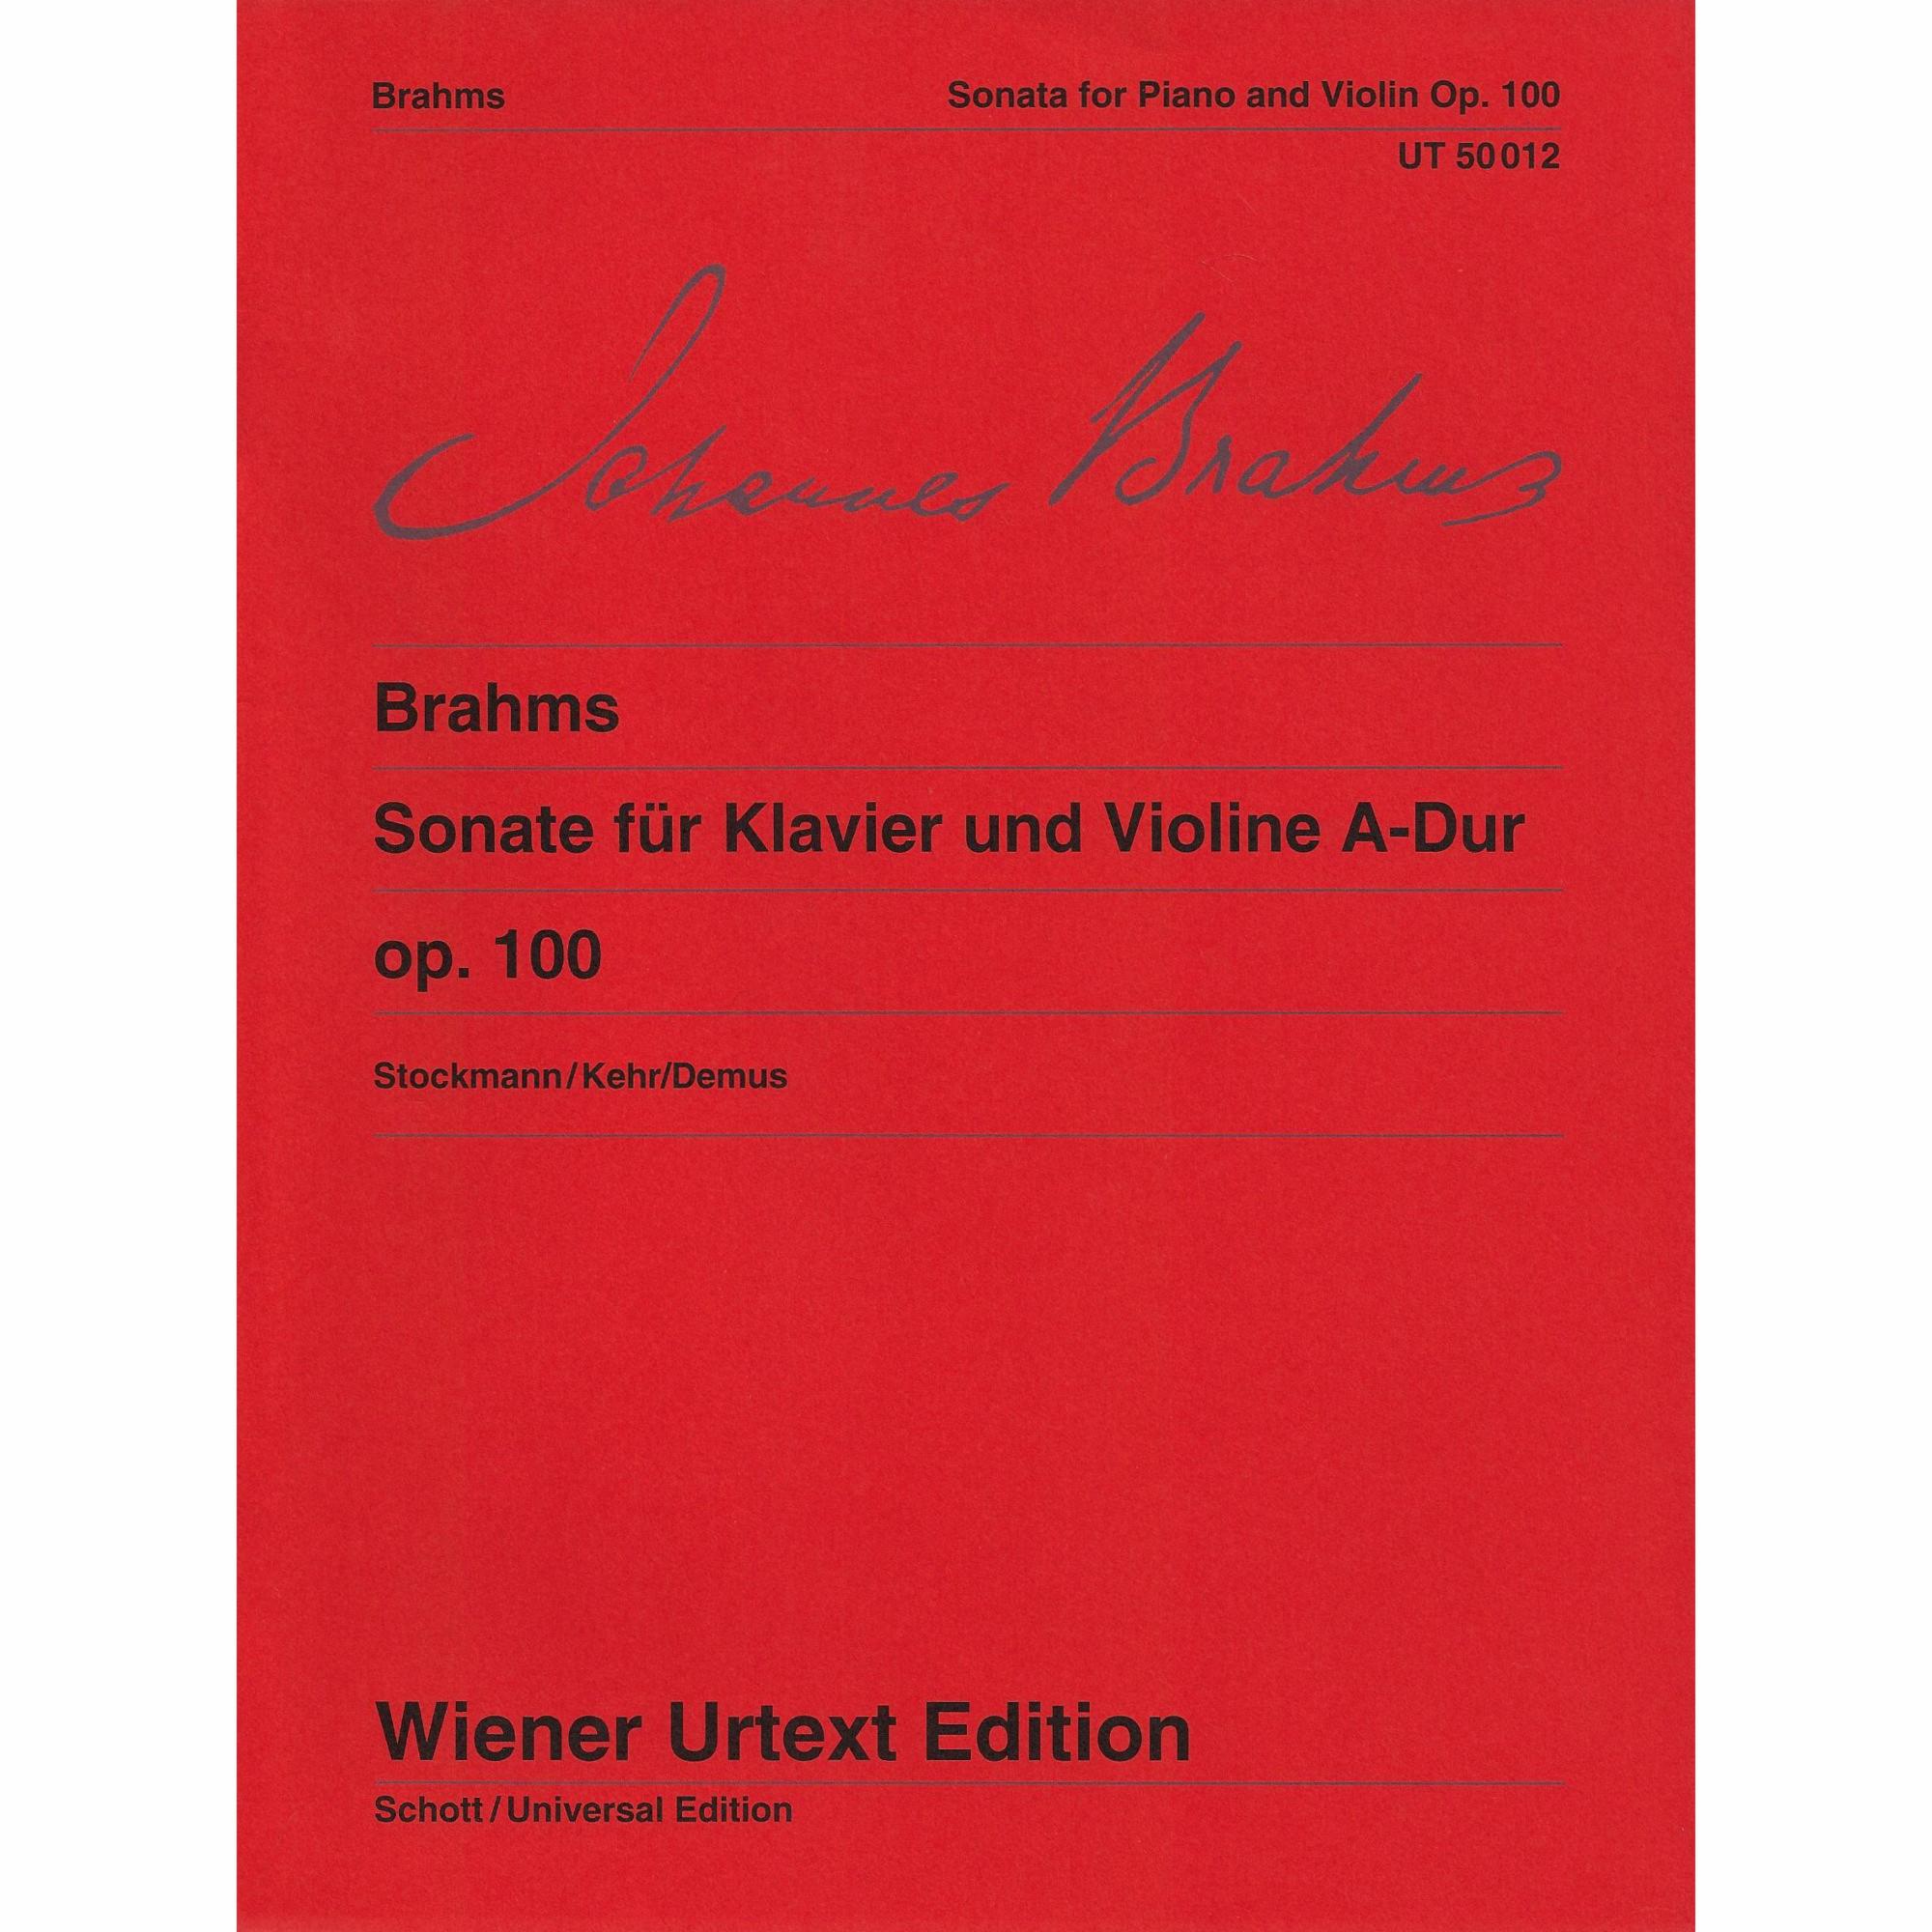 Brahms -- Sonata in A Major, Op. 100 for Violin and Piano